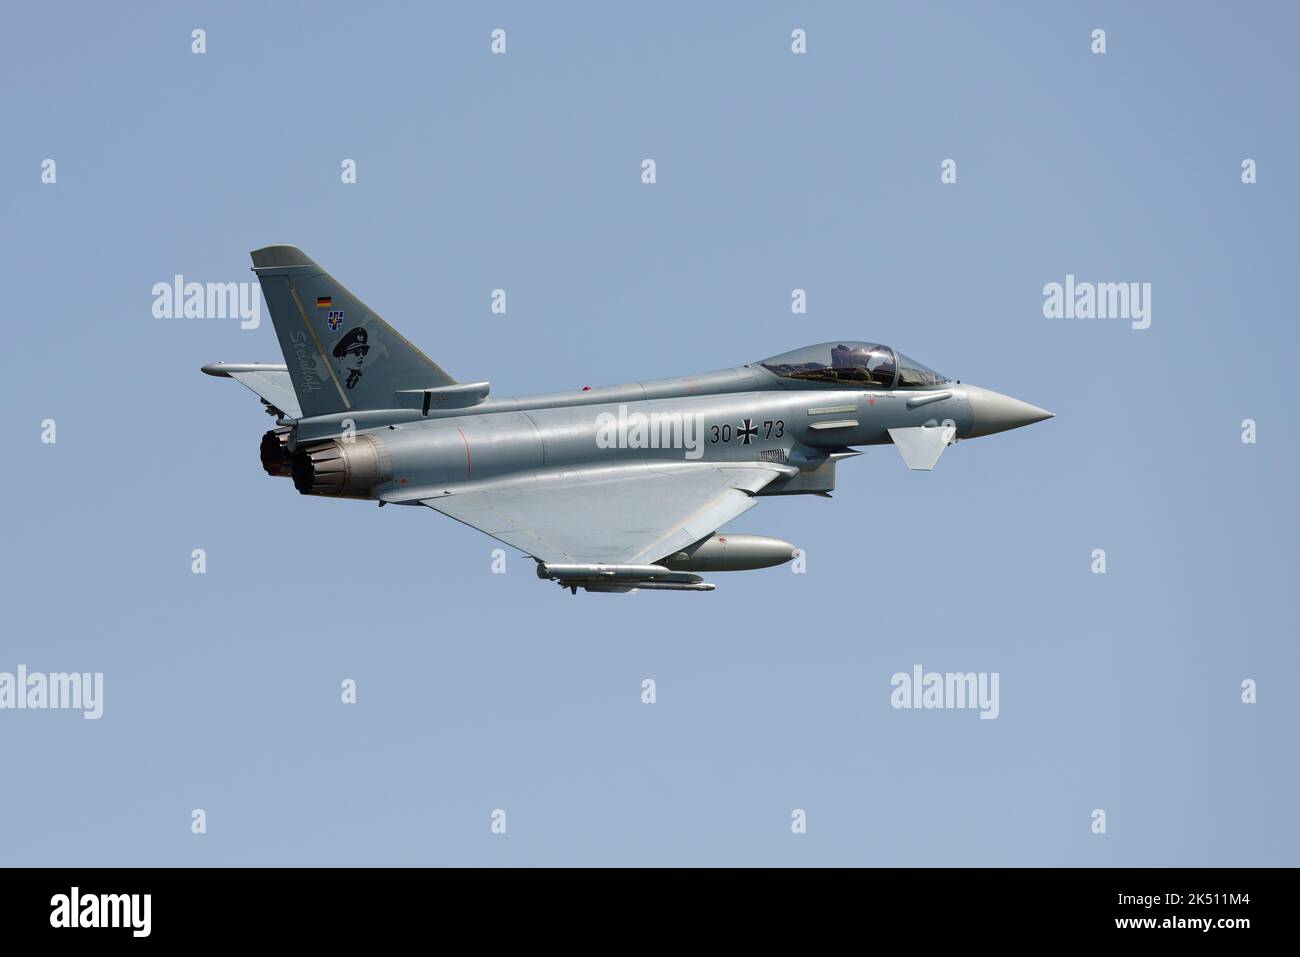 German Luftwaffe Eurofighter EF2000 Fighter Jet 3073 departs RAF Fairford in England after participating in the Royal International Air Tattoo Stock Photo